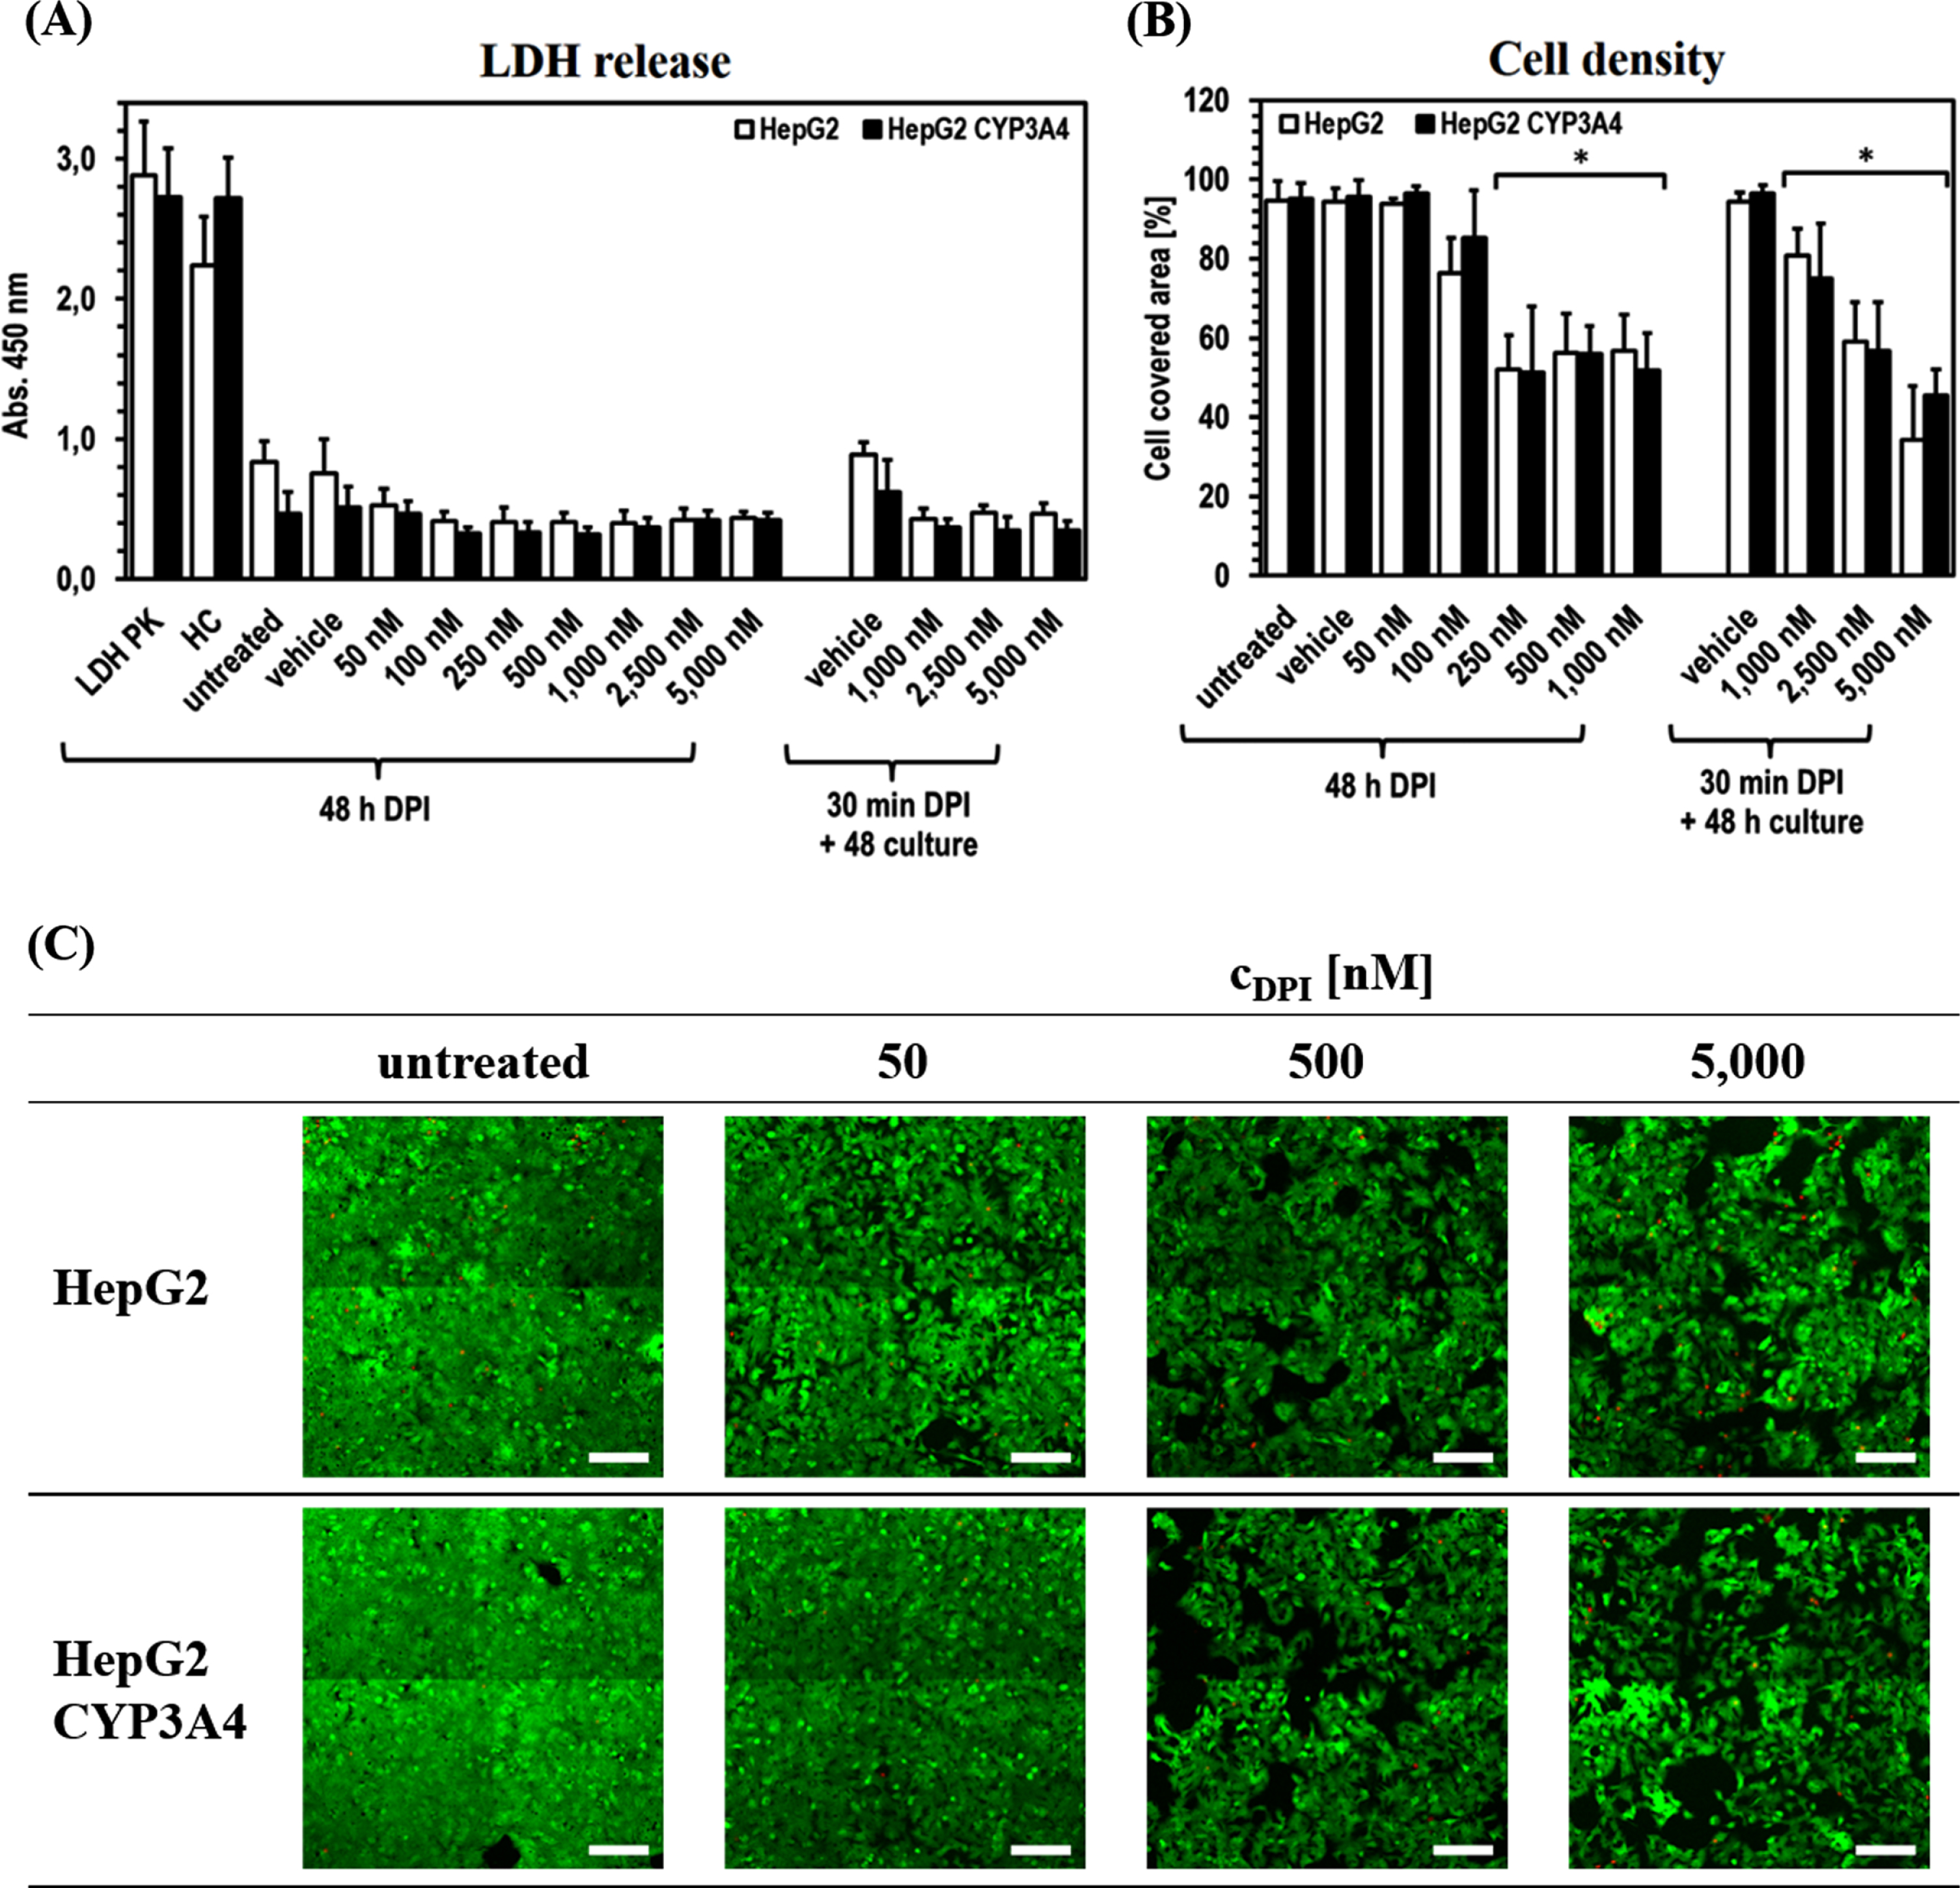 Cytostatic effect of DPI on HepG2 and HepG2-CYP3A4 cells. Analysis of the HepG2 and HepG2-CYP3A4 cell integrity via LDH release (A), metabolic activity via ATP level (B) and viability via FDA/PI staining (C) (Mean±standard deviation; *p < 0.05 compared to untreated cells; n = 12 pictures from 2 independent experiments; representative cLSM images of cells treated for 48 h with DPI at 10x primary magnification; green = vital cells, red = dead cells; scale: 200μm).